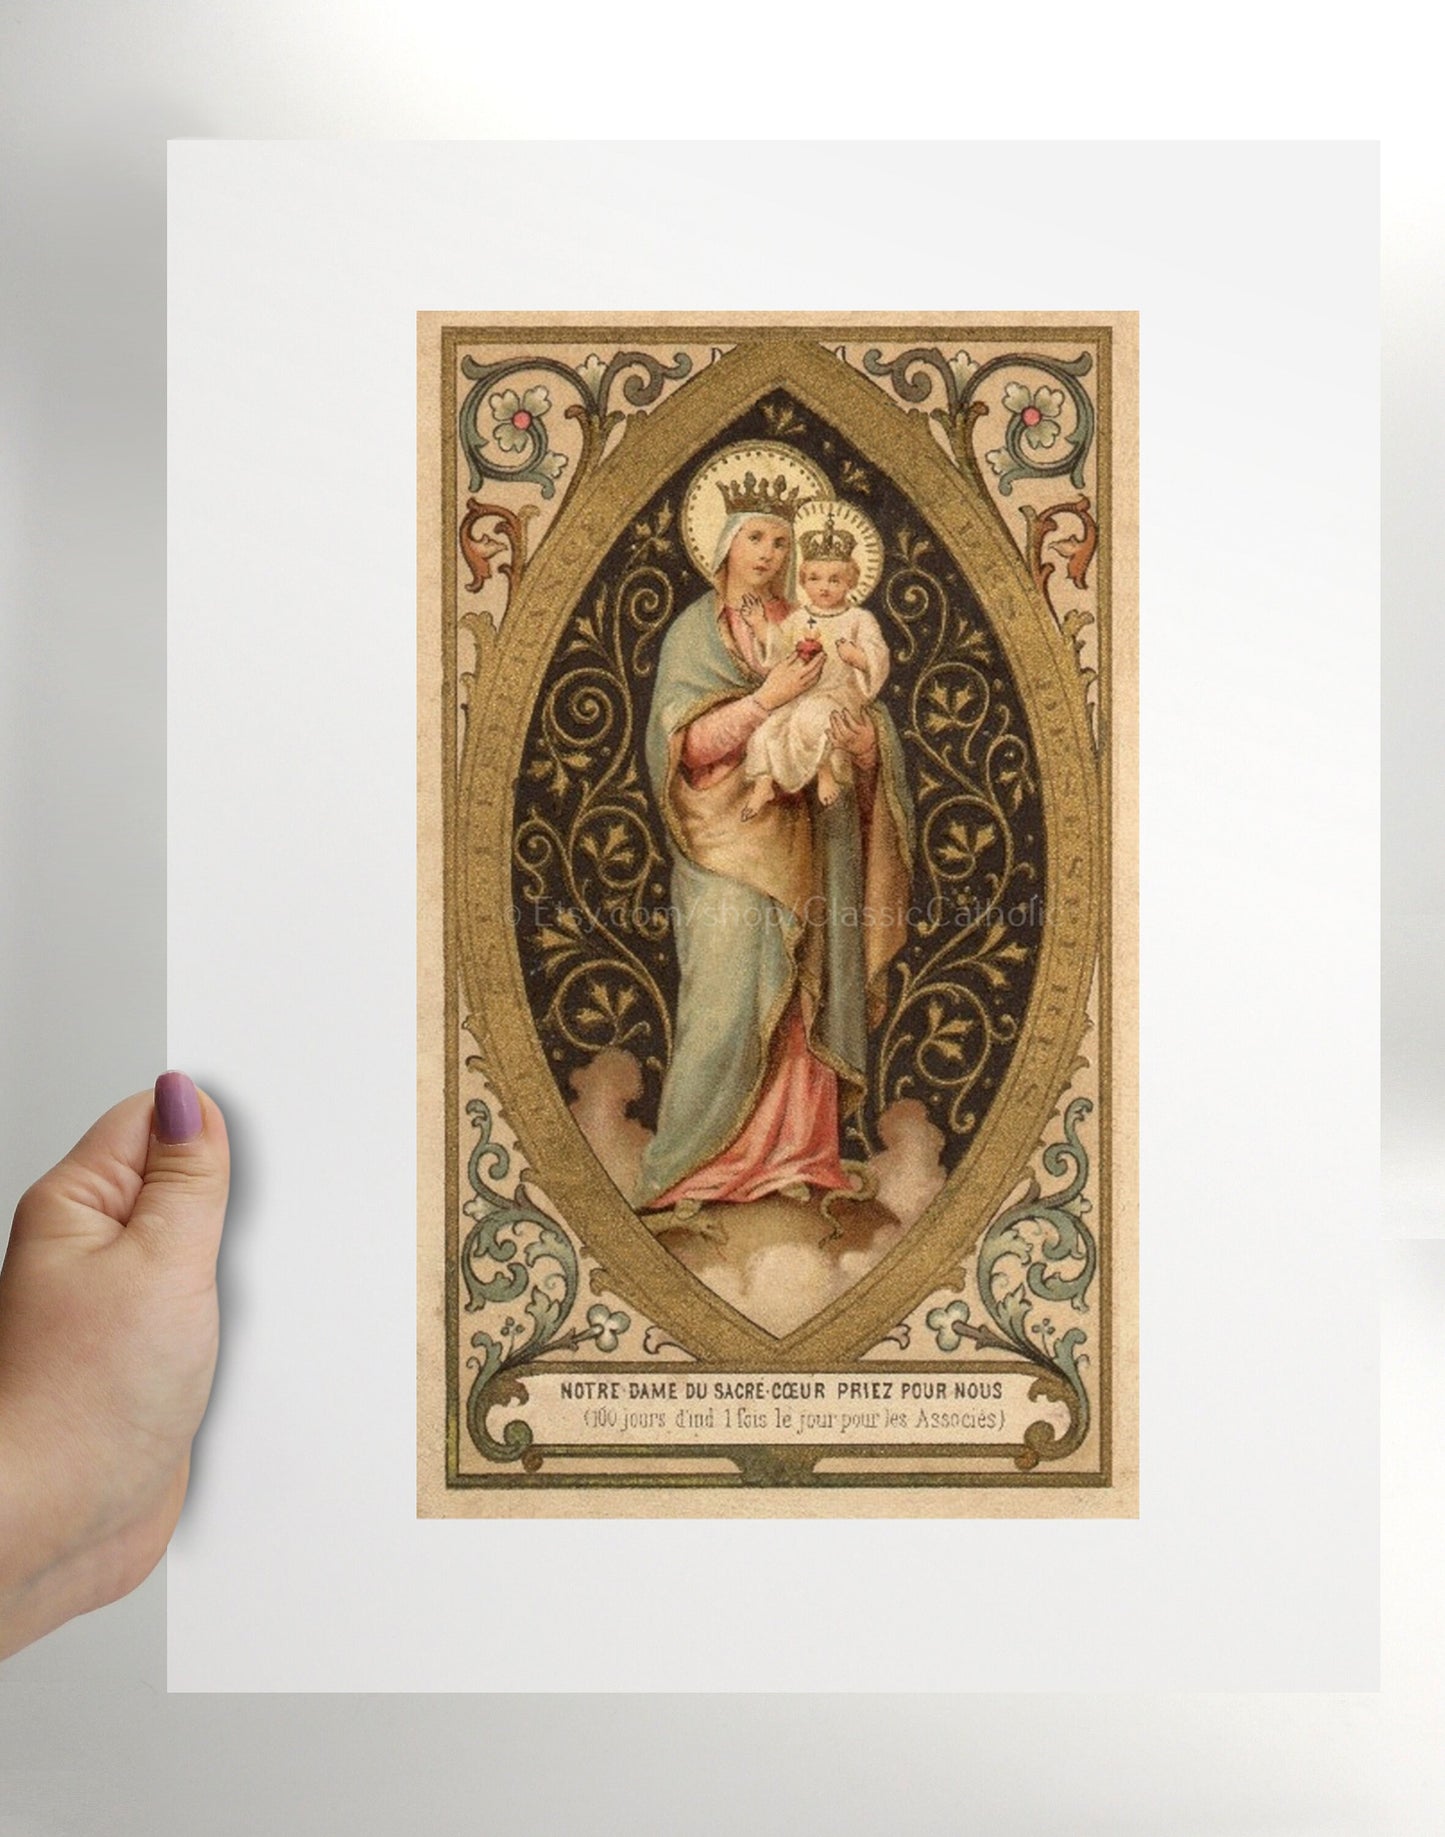 Our Lady of the Sacred Heart – based on a Vintage French Holy Card – Catholic Art Print